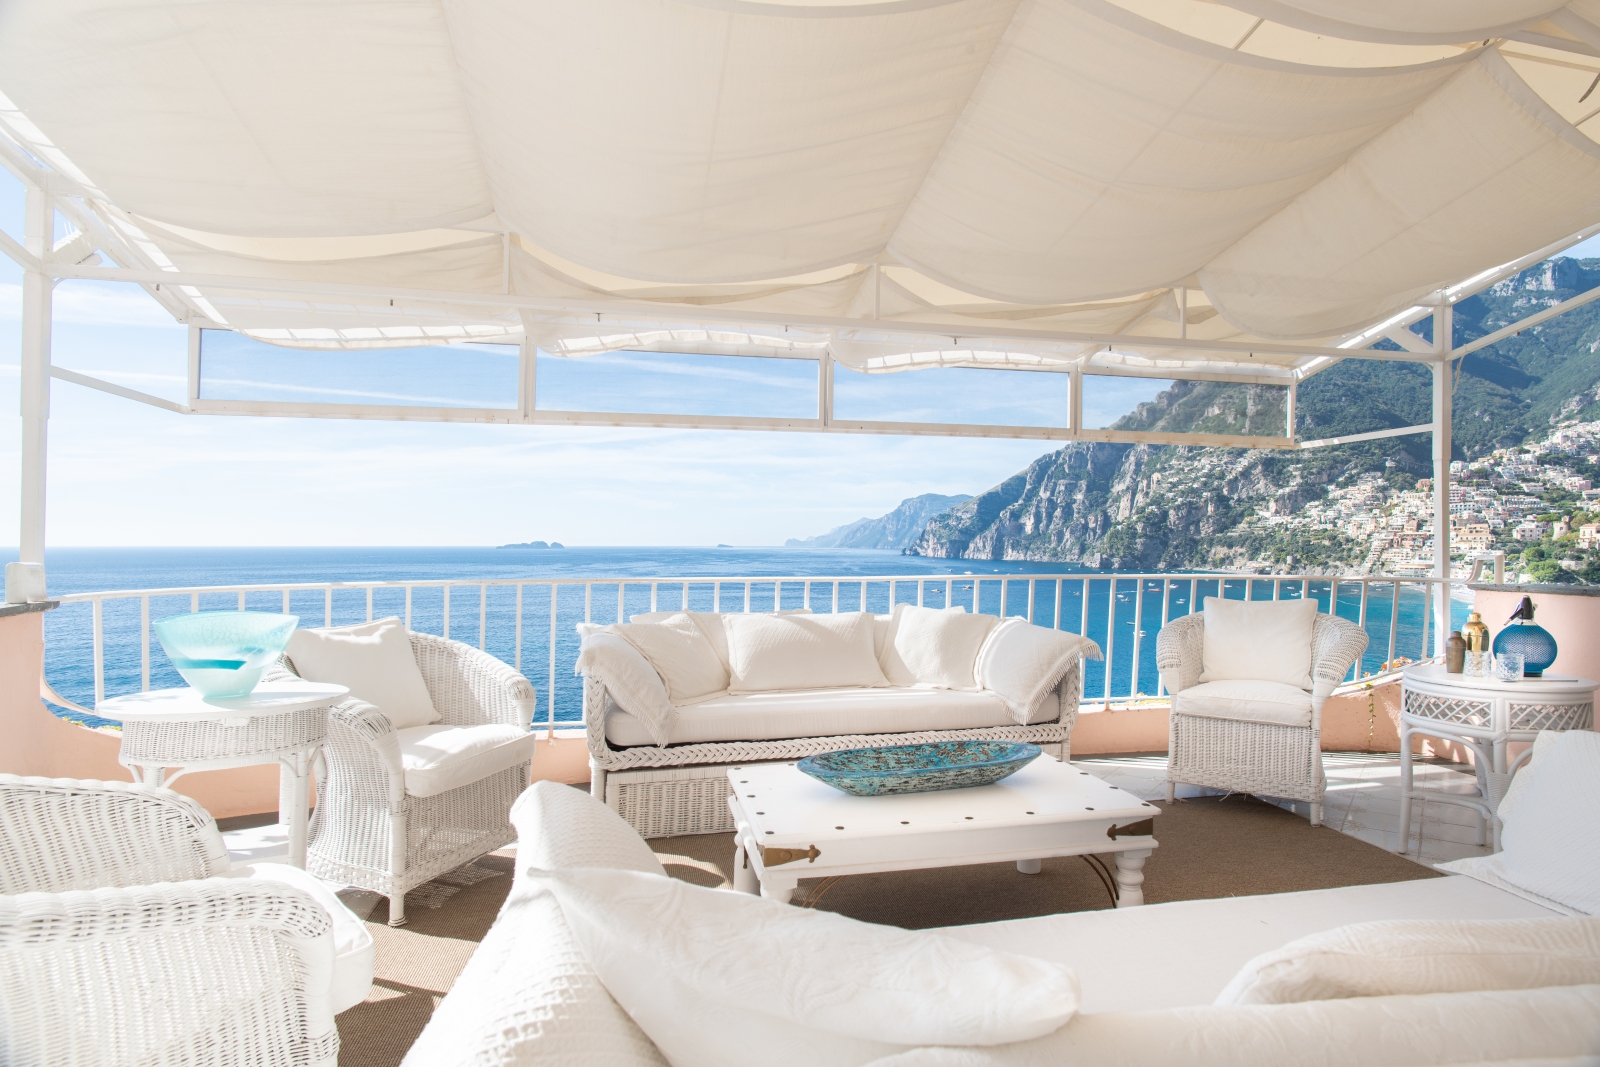 Outdoor seating with white furniture and white cover at Villa Contralto in Amalfi